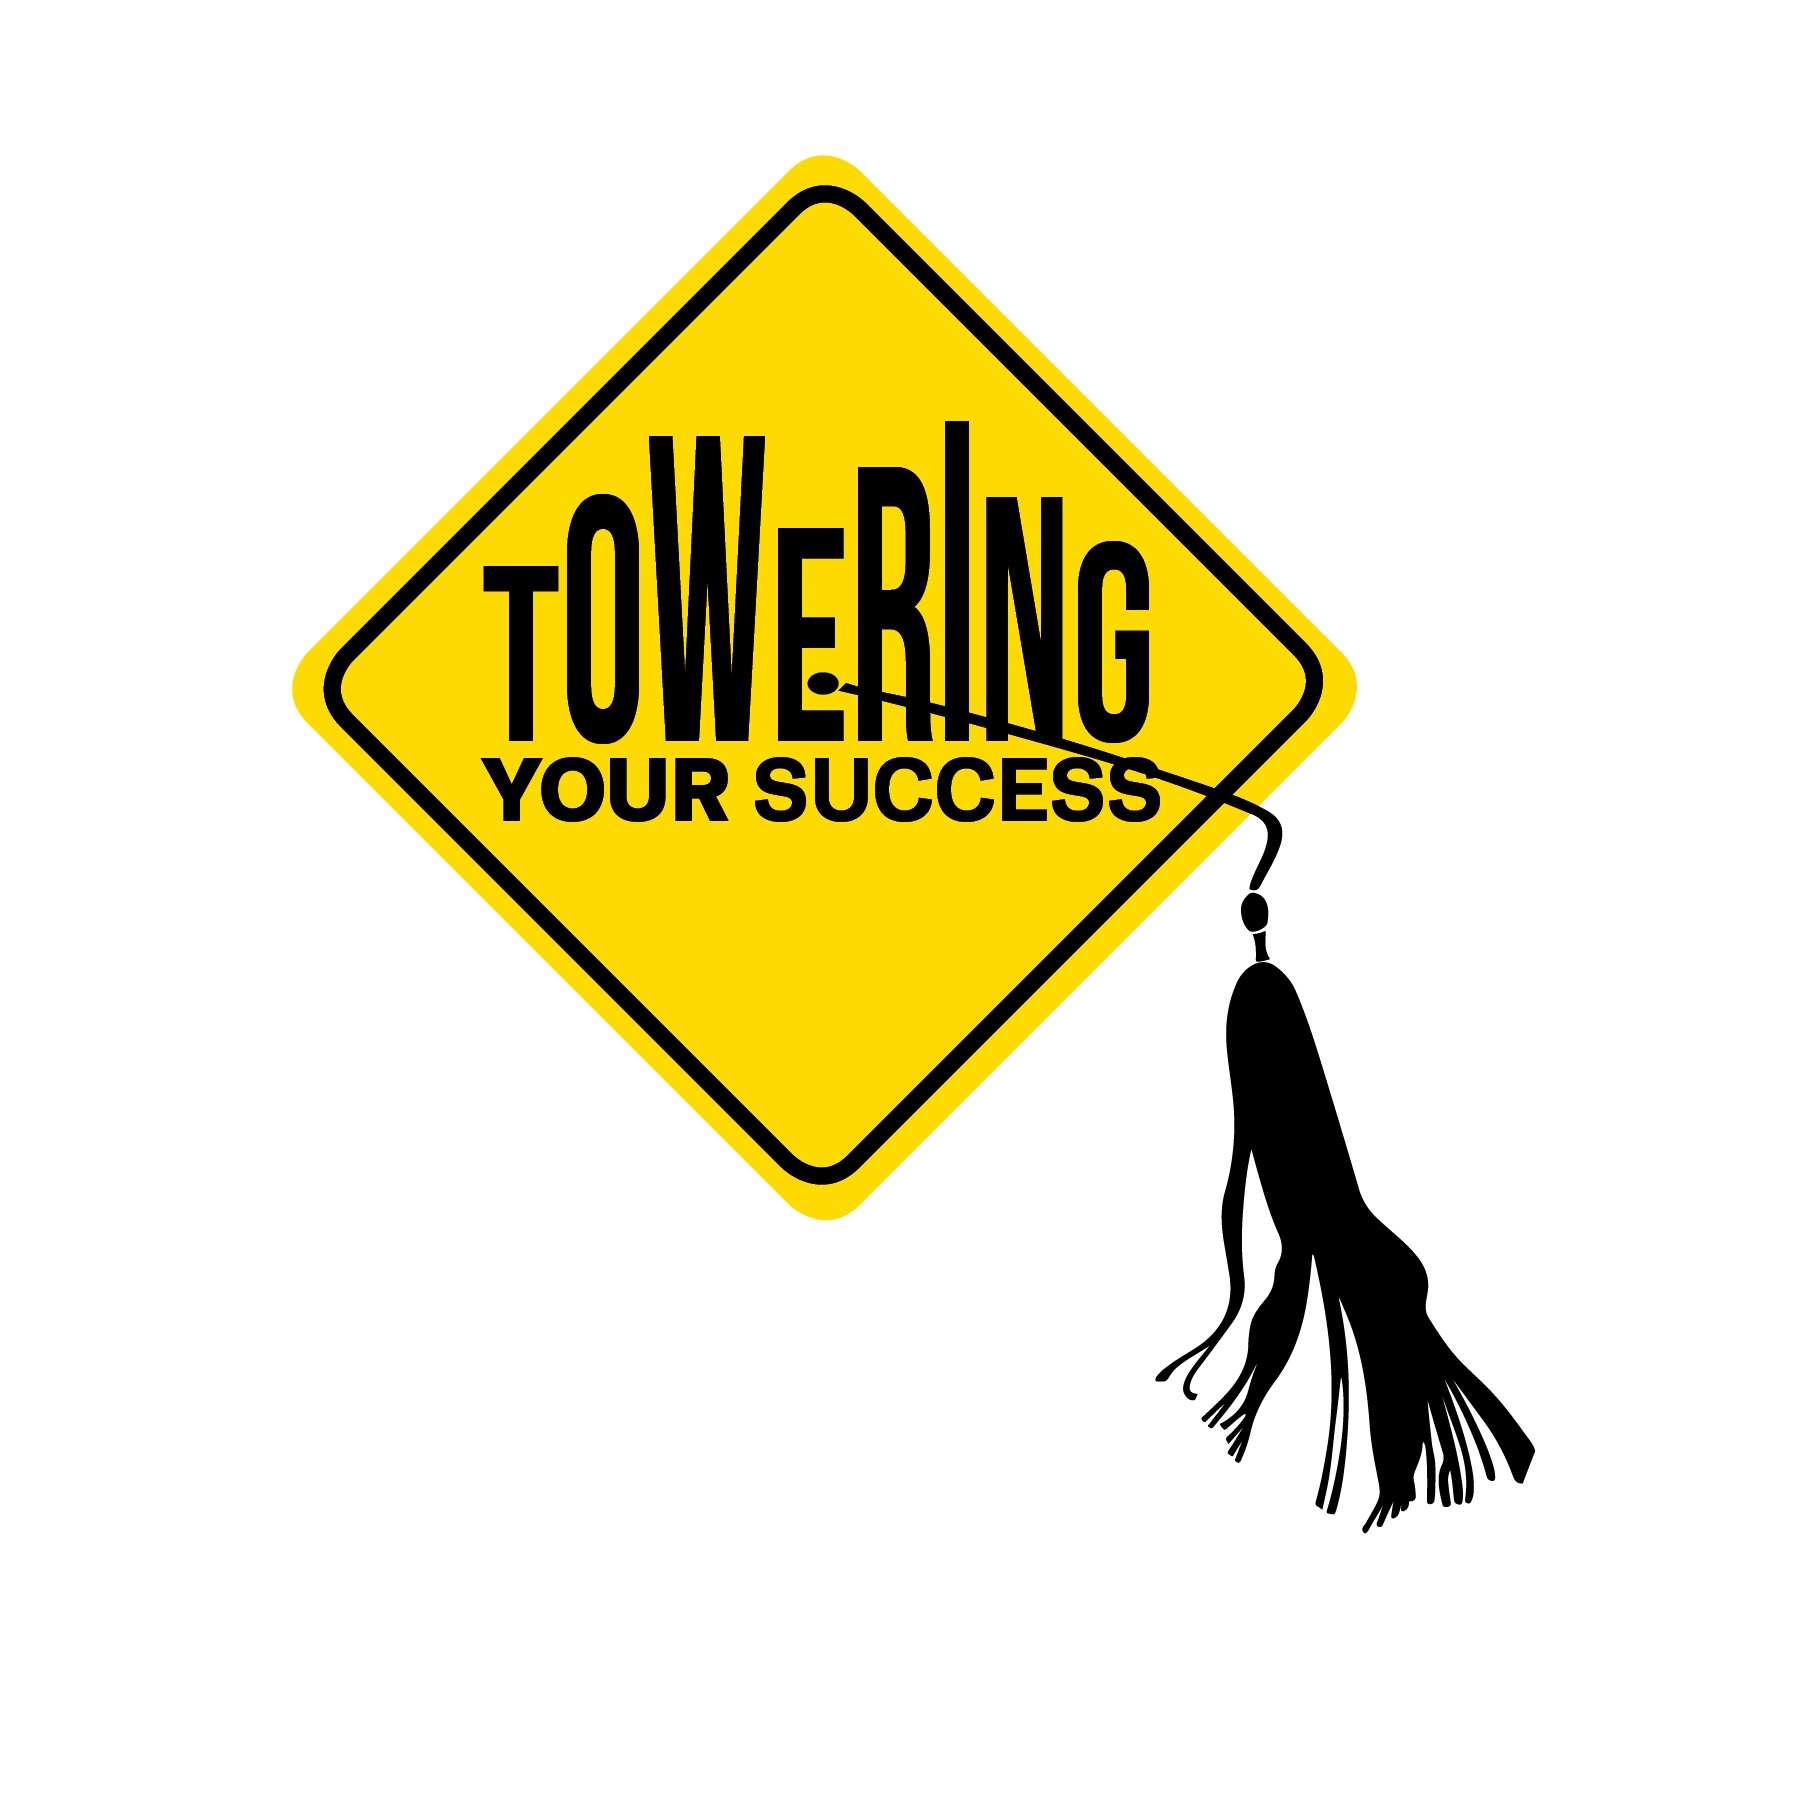 Towering Your Success